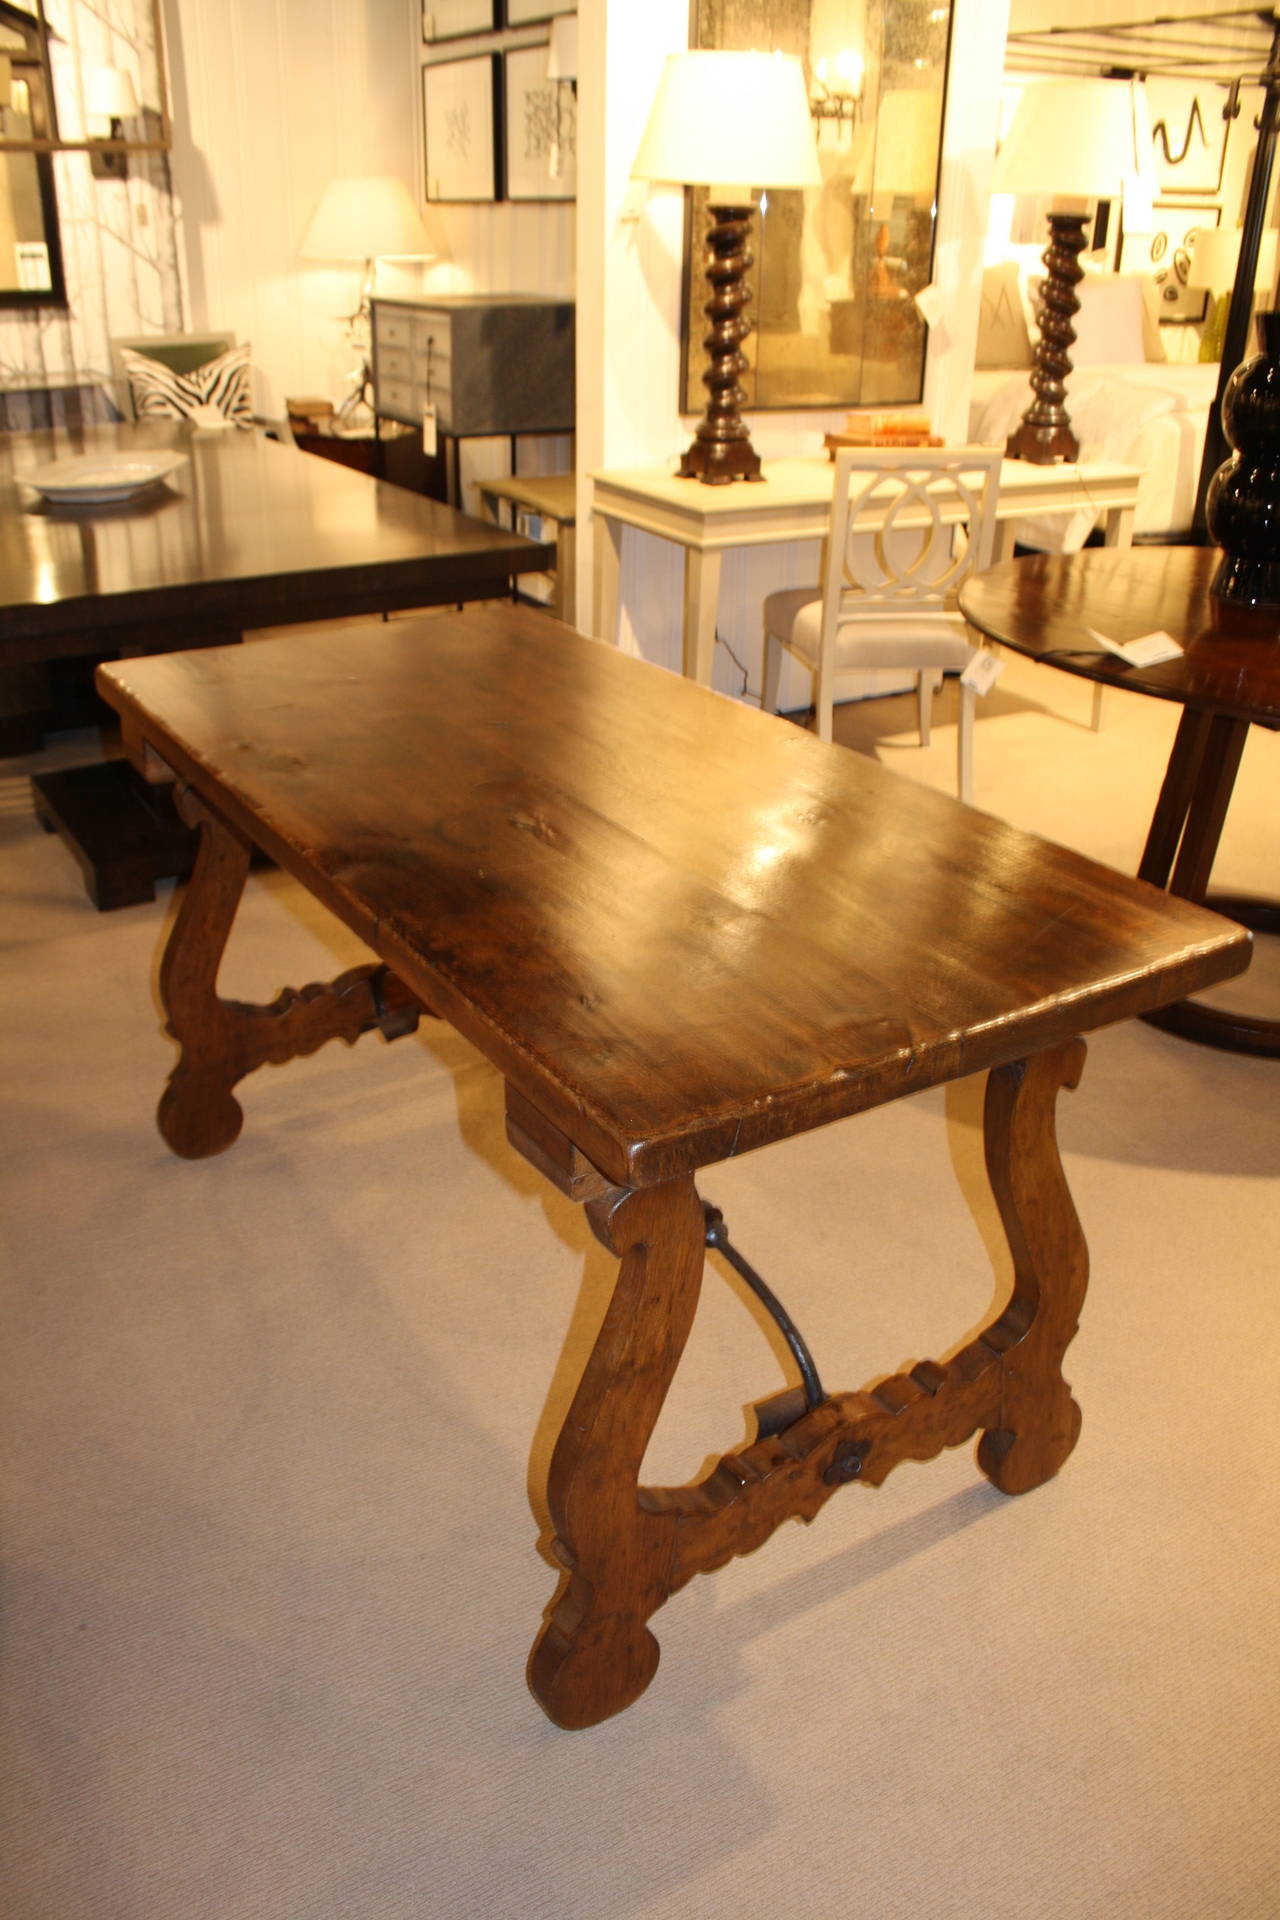 Mid-20th century Spanish oak table with two decorative iron stretchers and carved legs.